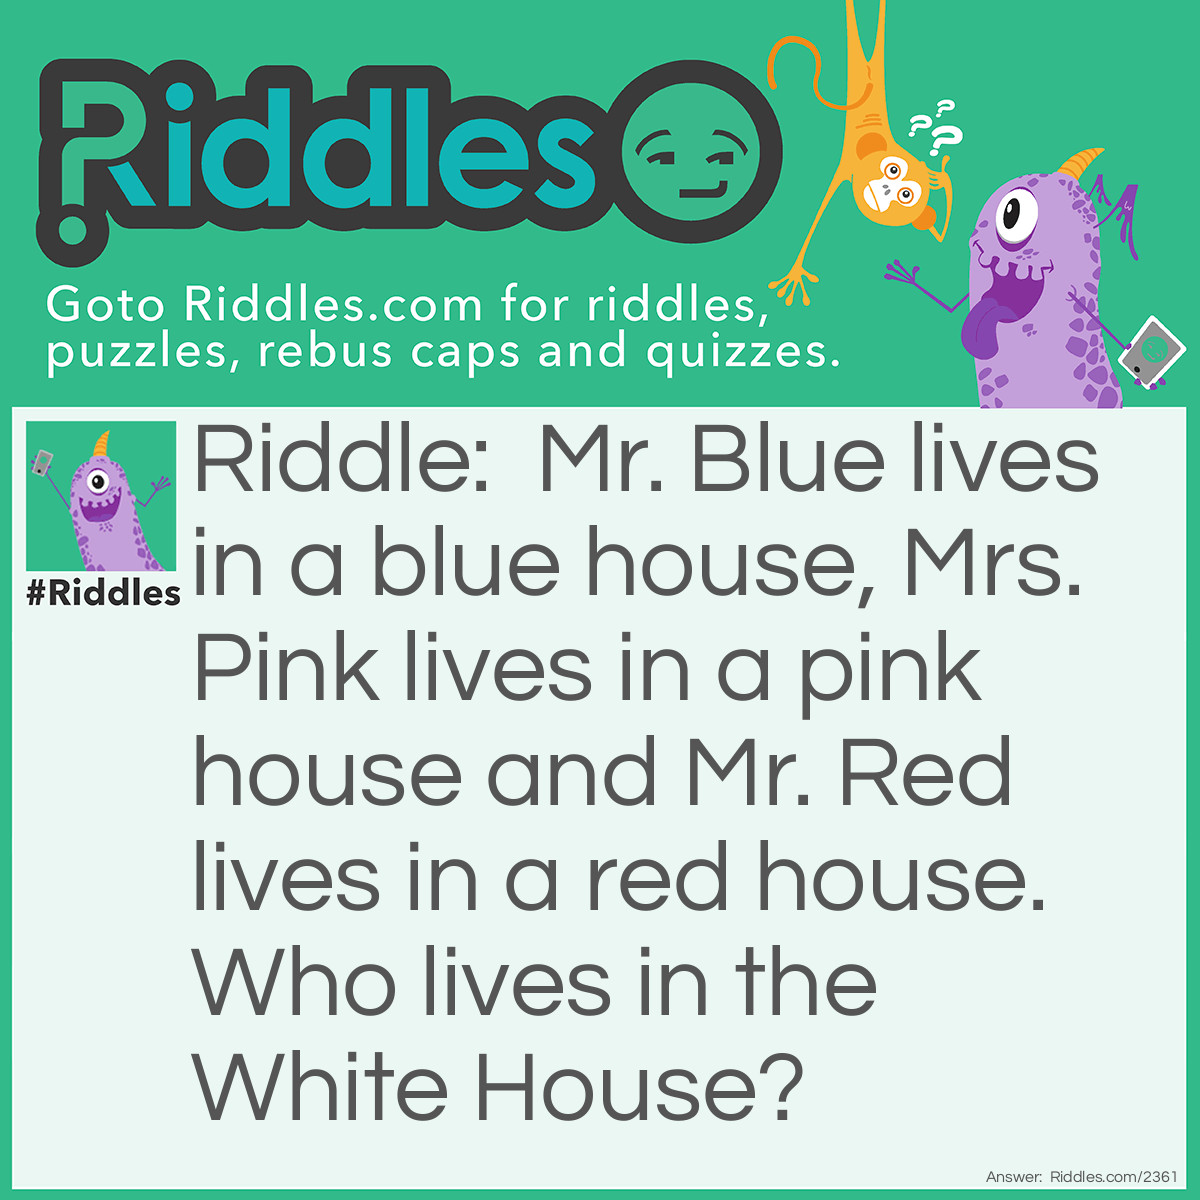 Riddle: Mr. Blue lives in a blue house, Mrs. Pink lives in a pink house and Mr. Red lives in a red house. Who lives in the White House? Answer: The President.